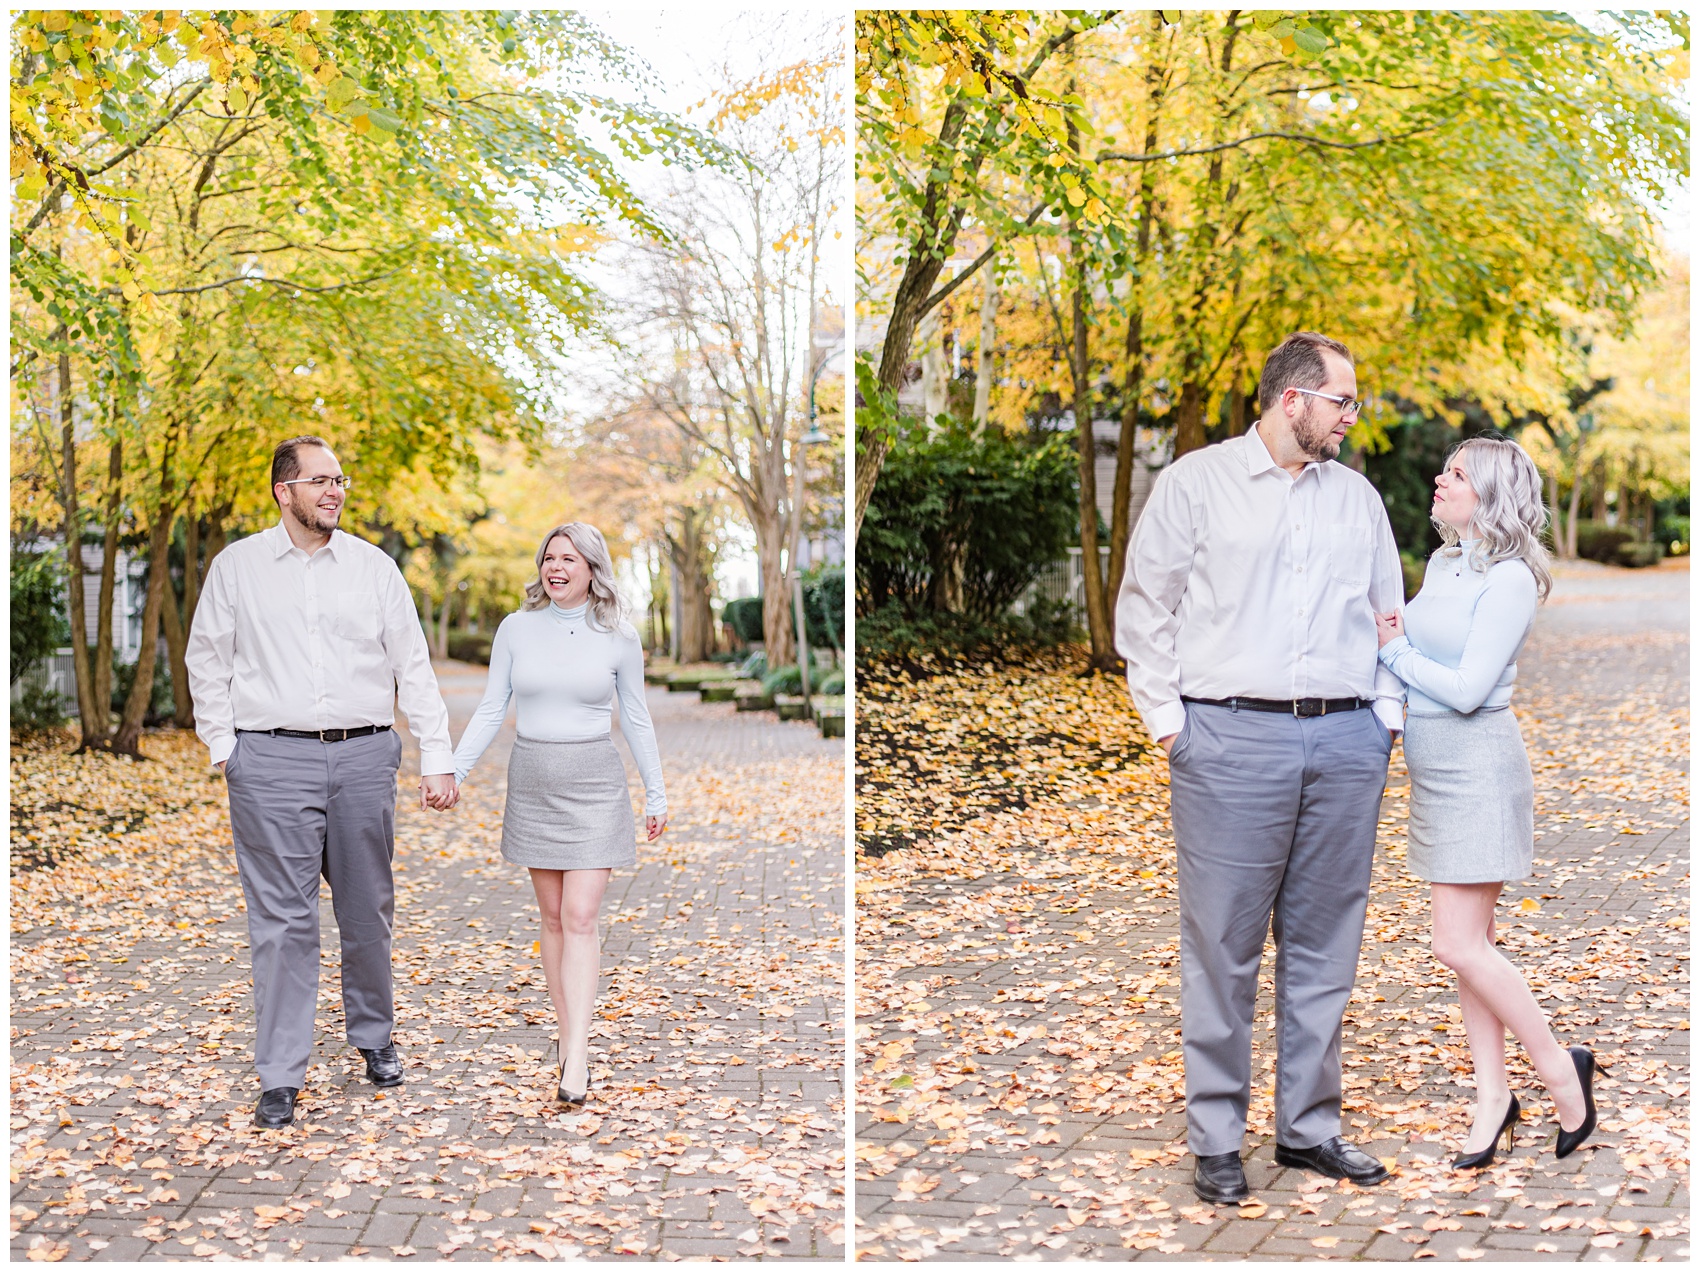 Autumn Engagement Photos in Vancouver with yellow leaves